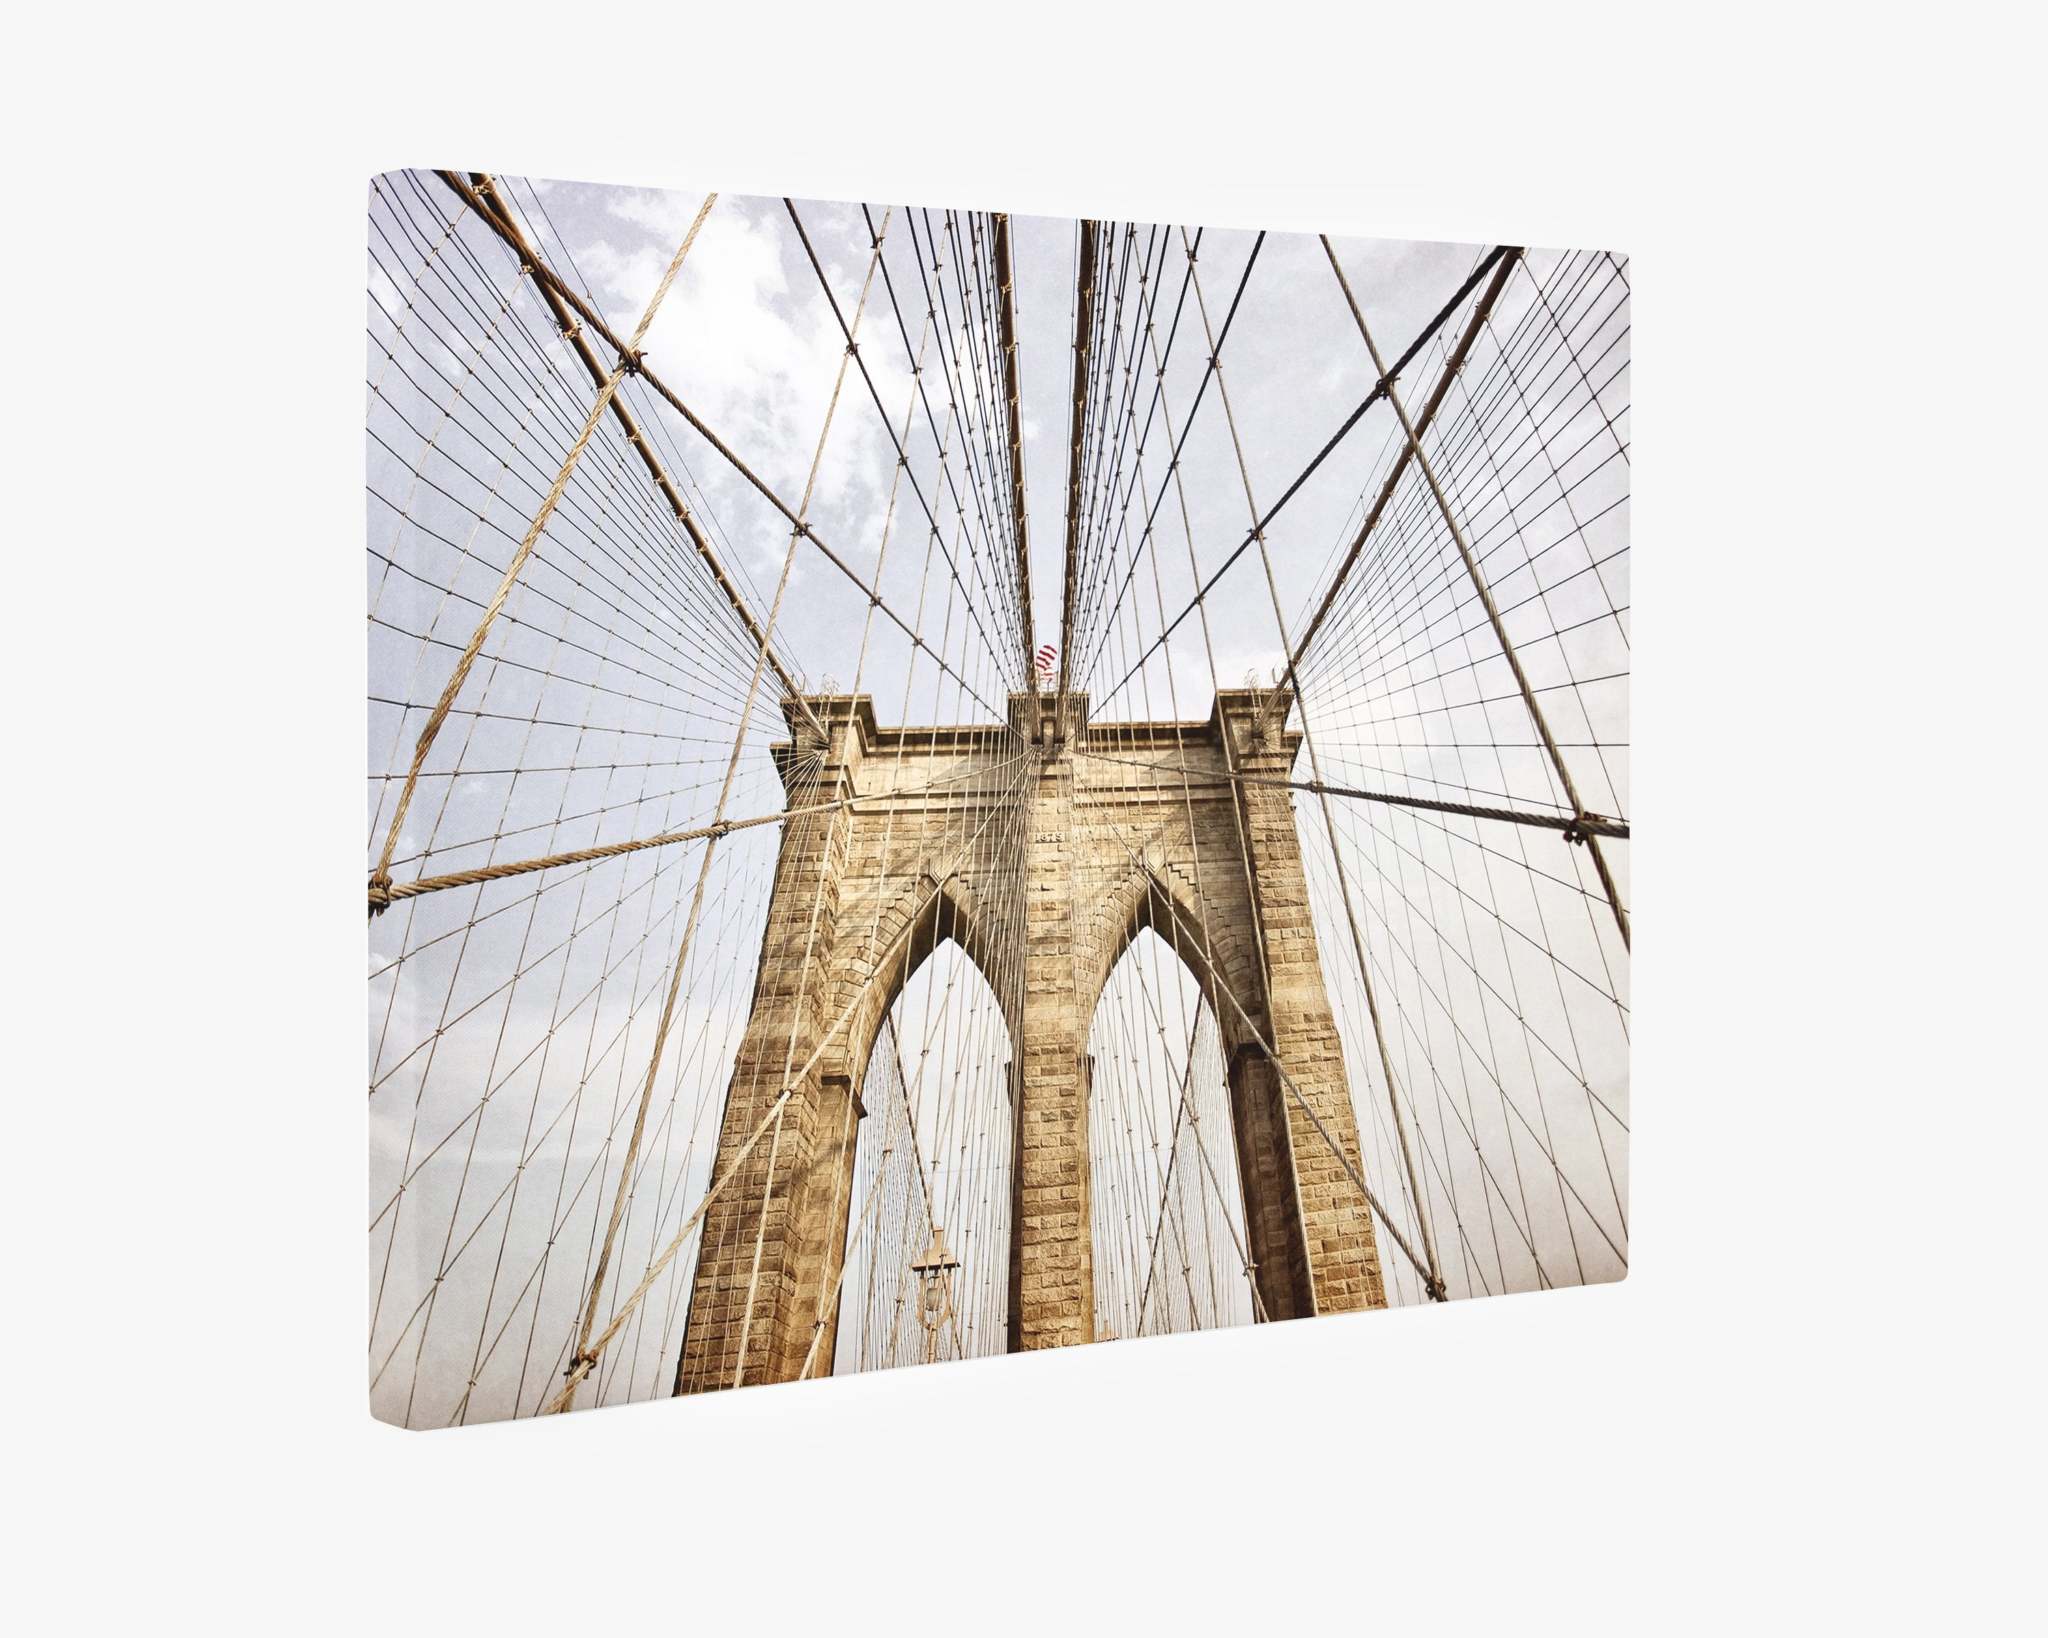 An Offley Green New York City Canvas Wall Art, 'Brooklyn Wires,' featuring the iconic view of the Brooklyn Bridge. The image highlights the bridge's stone towers and intricate web of suspension cables against a cloudy sky backdrop. The perspective is upwards, emphasizing the architectural details and grandeur on premium artist-grade canvas.